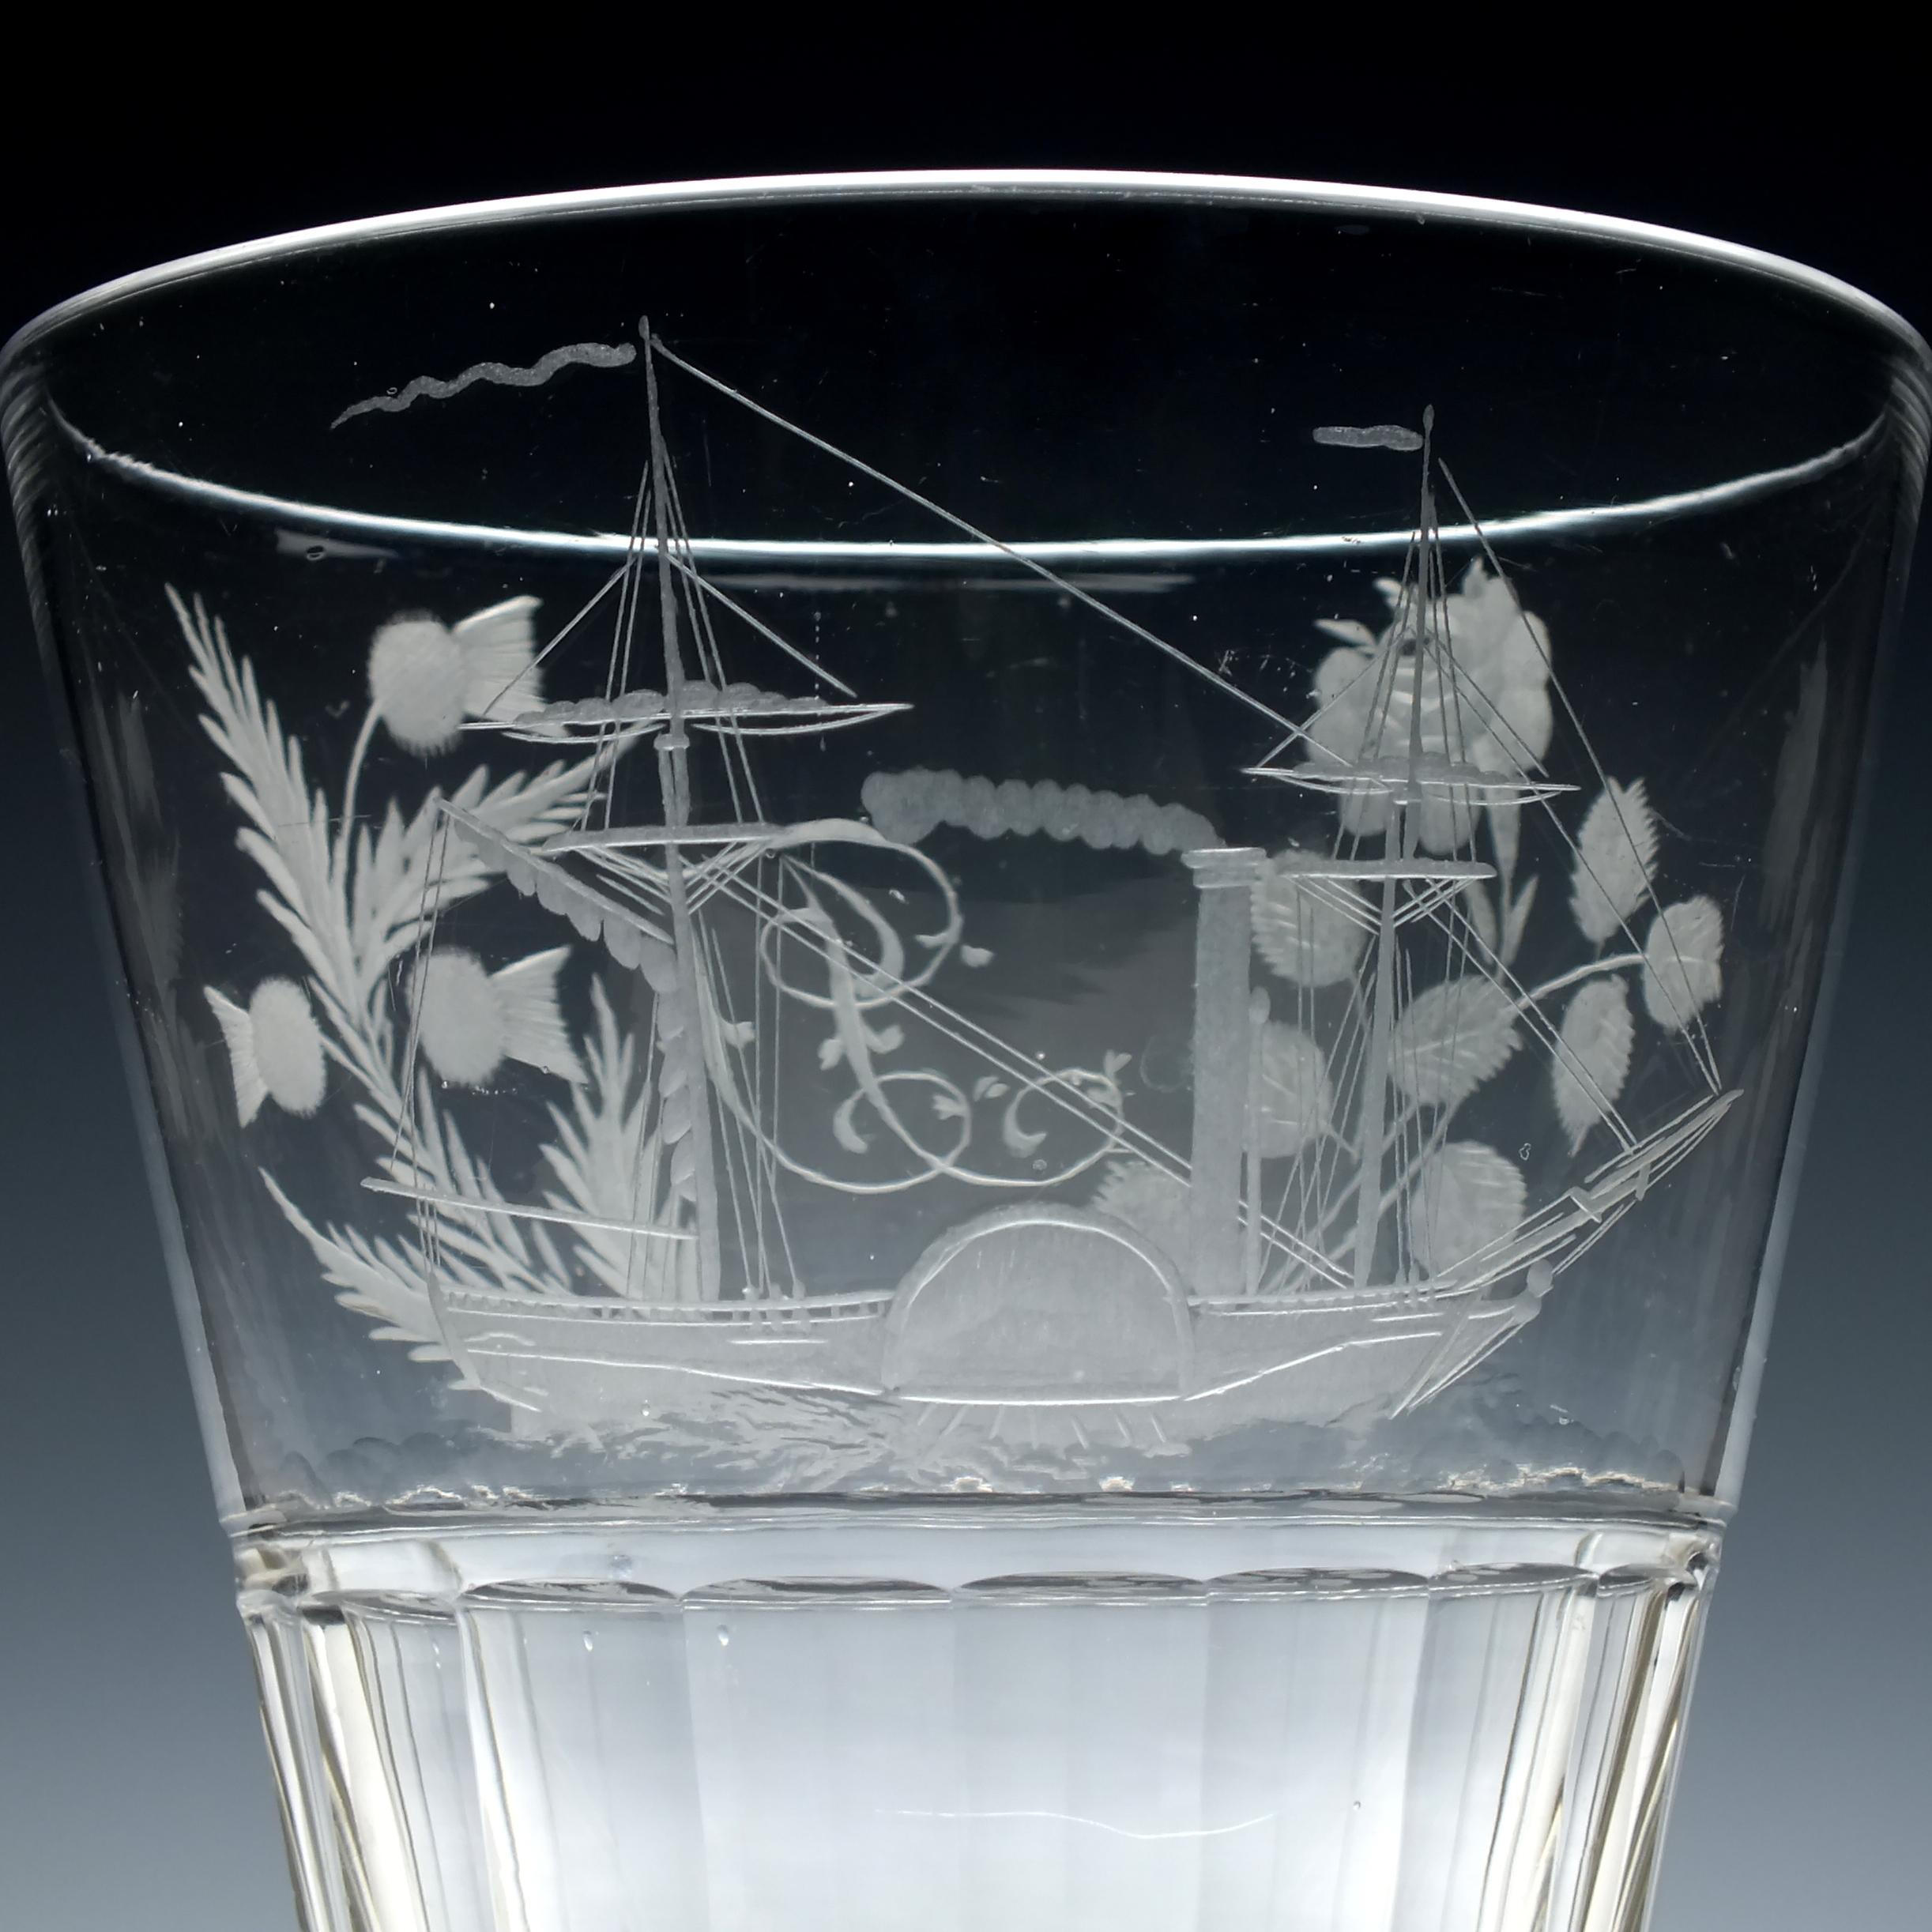 Large 19th Century Glass Serving Rummer Engraved with Paddle Steamer, circa 1830 For Sale 1